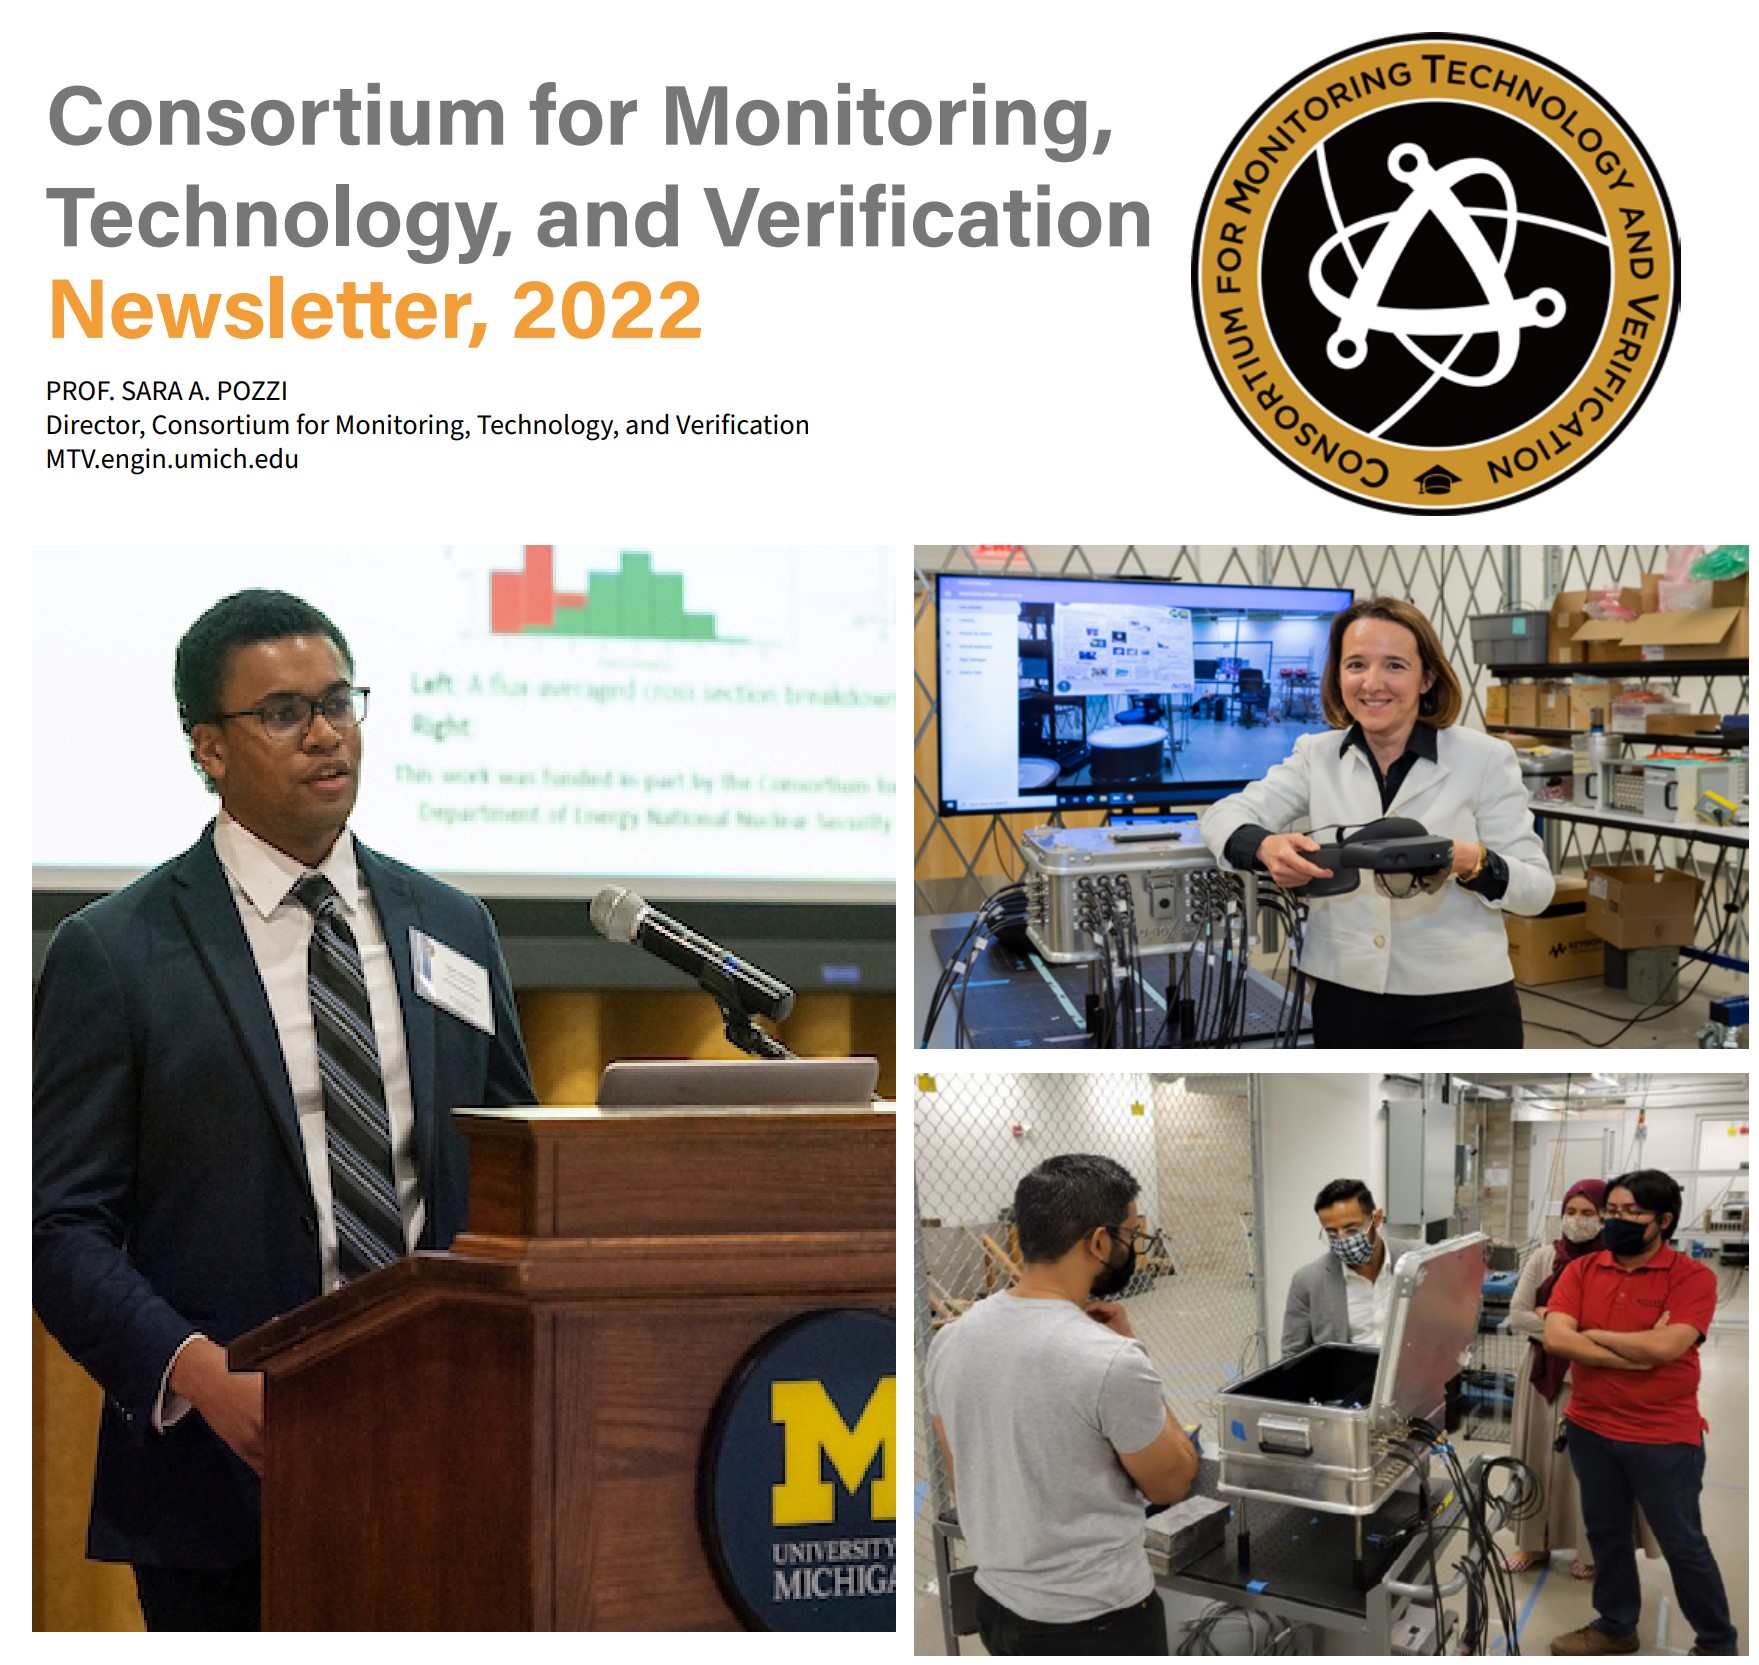 Consortium for Monitoring, Technology, and Verification Newsletter cover